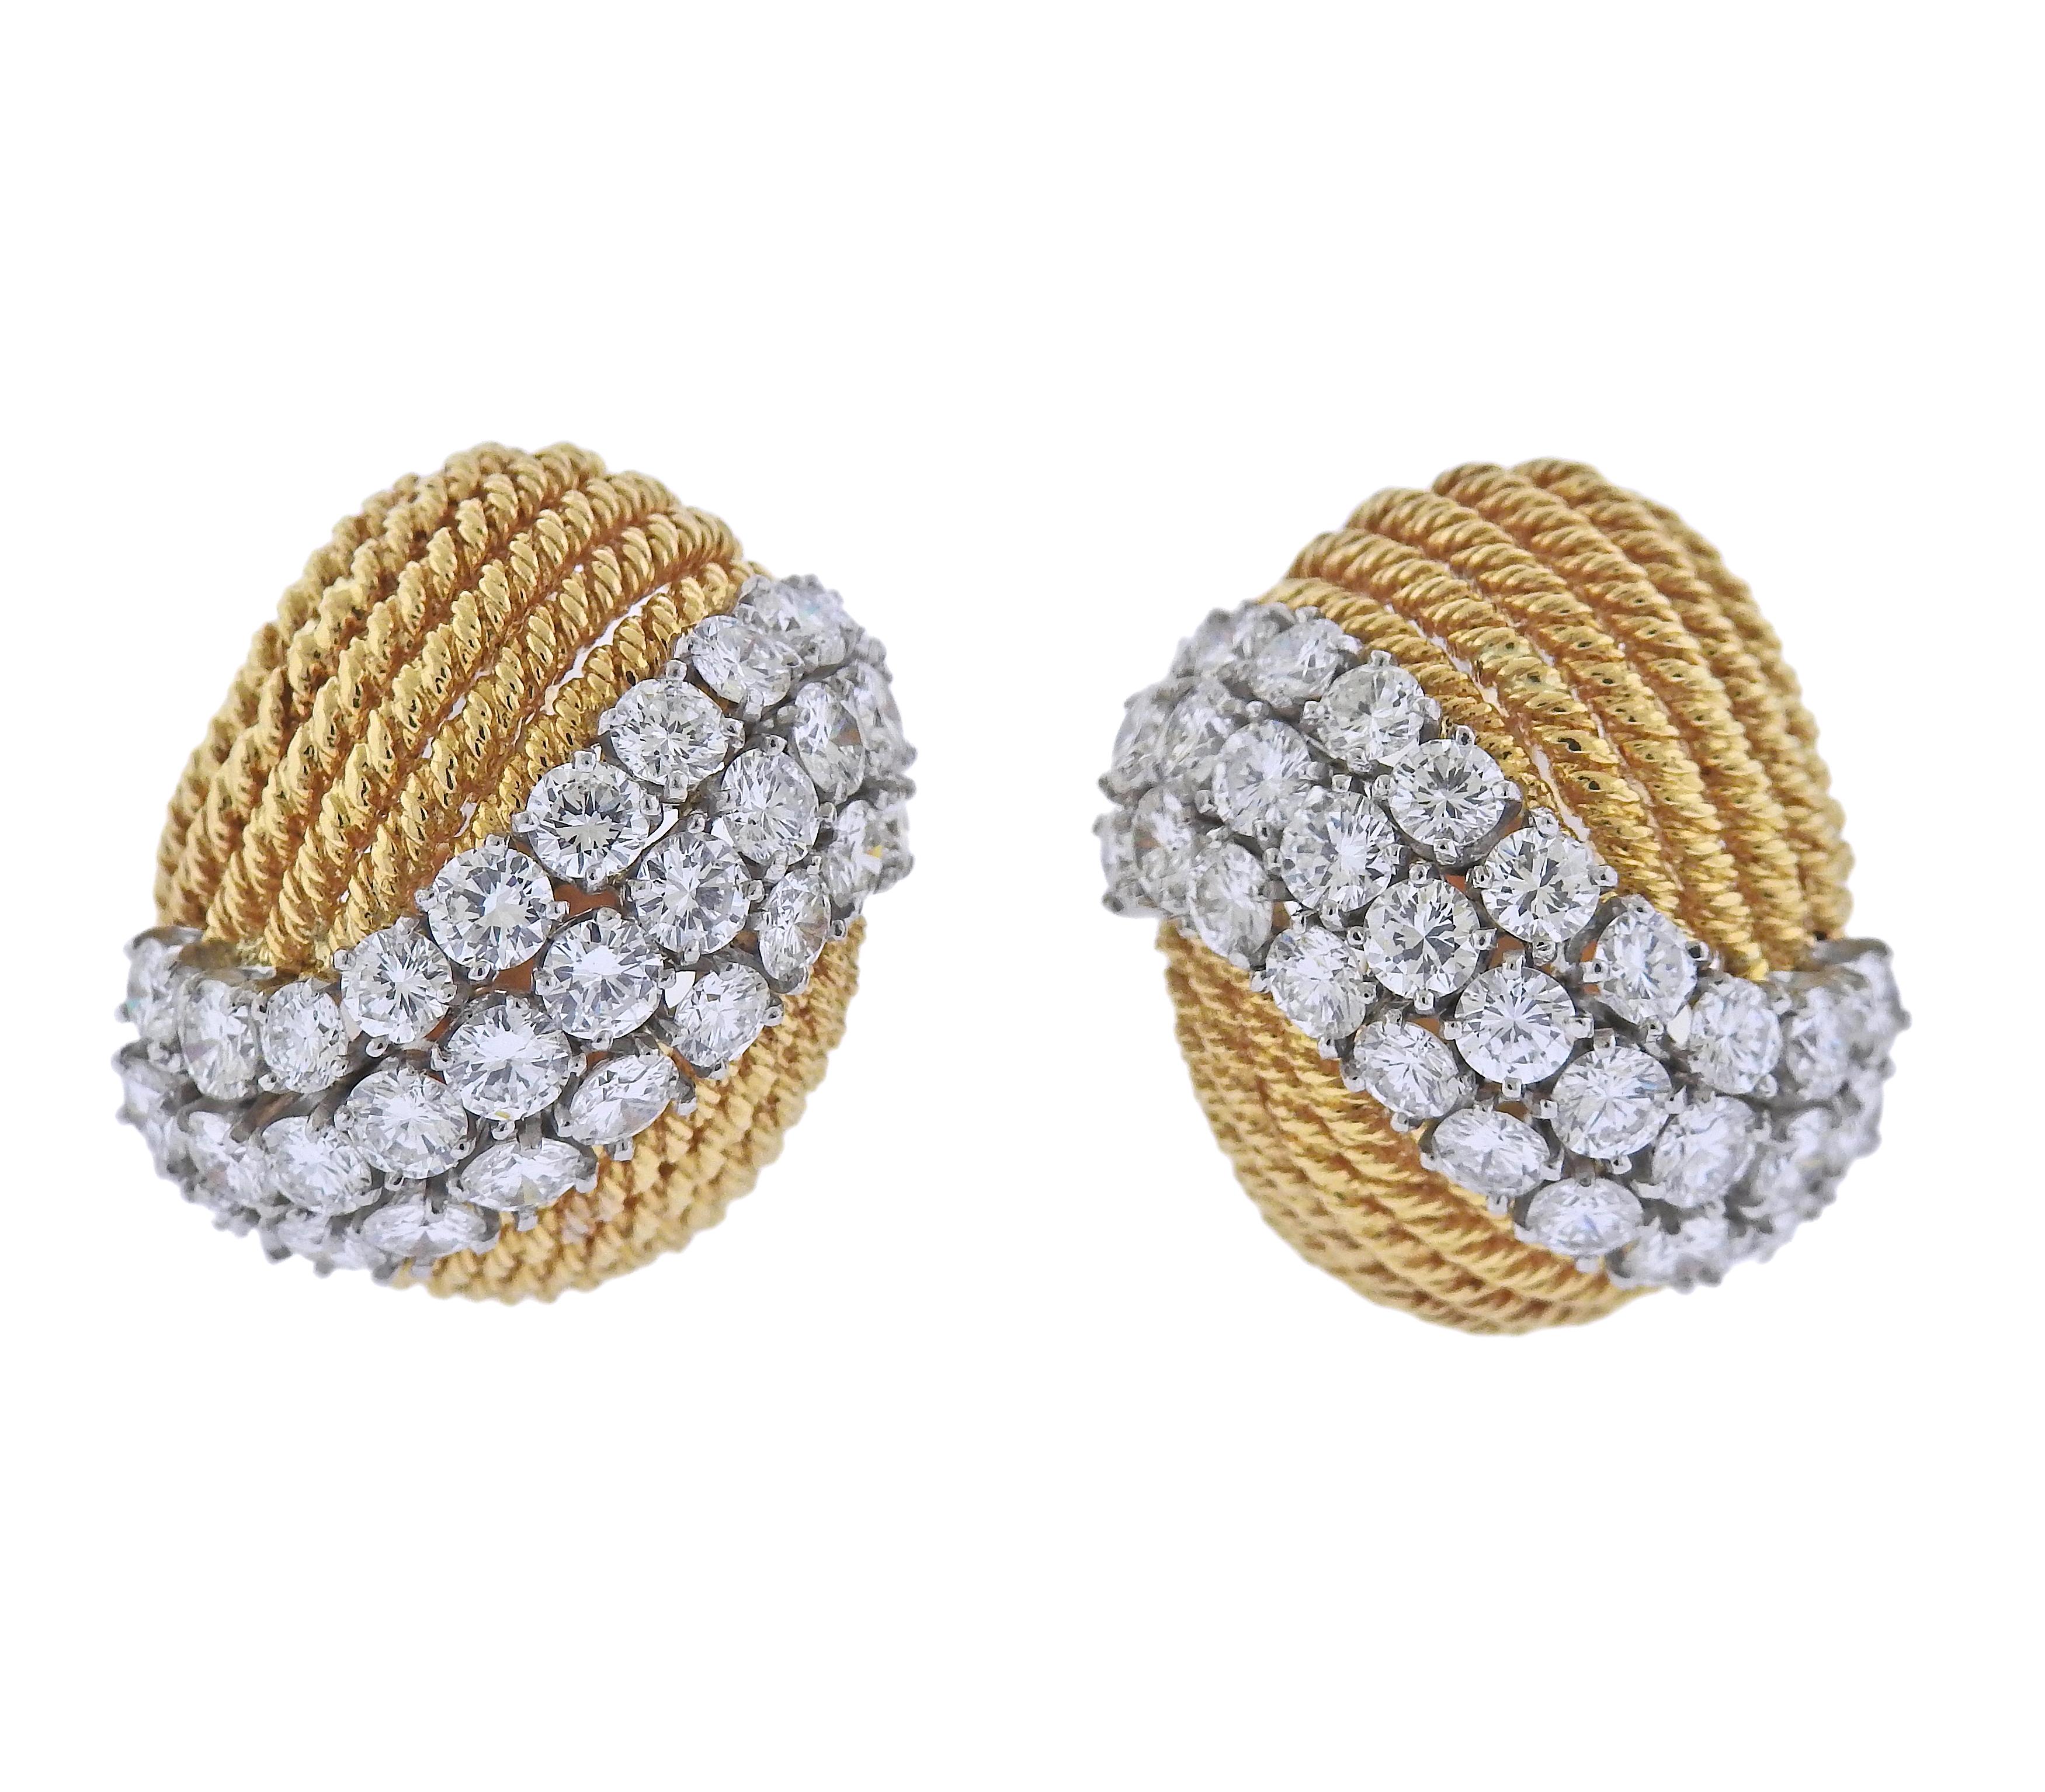 Pair of vintage circa 1960s 18k gold and platinum earrings, with approx. 6.50ctw H/VS-Si1 diamonds. Earrings are 25mm x 20mm. Marked: Webb, 18k,. Plat. Weight - 30.8 grams.
